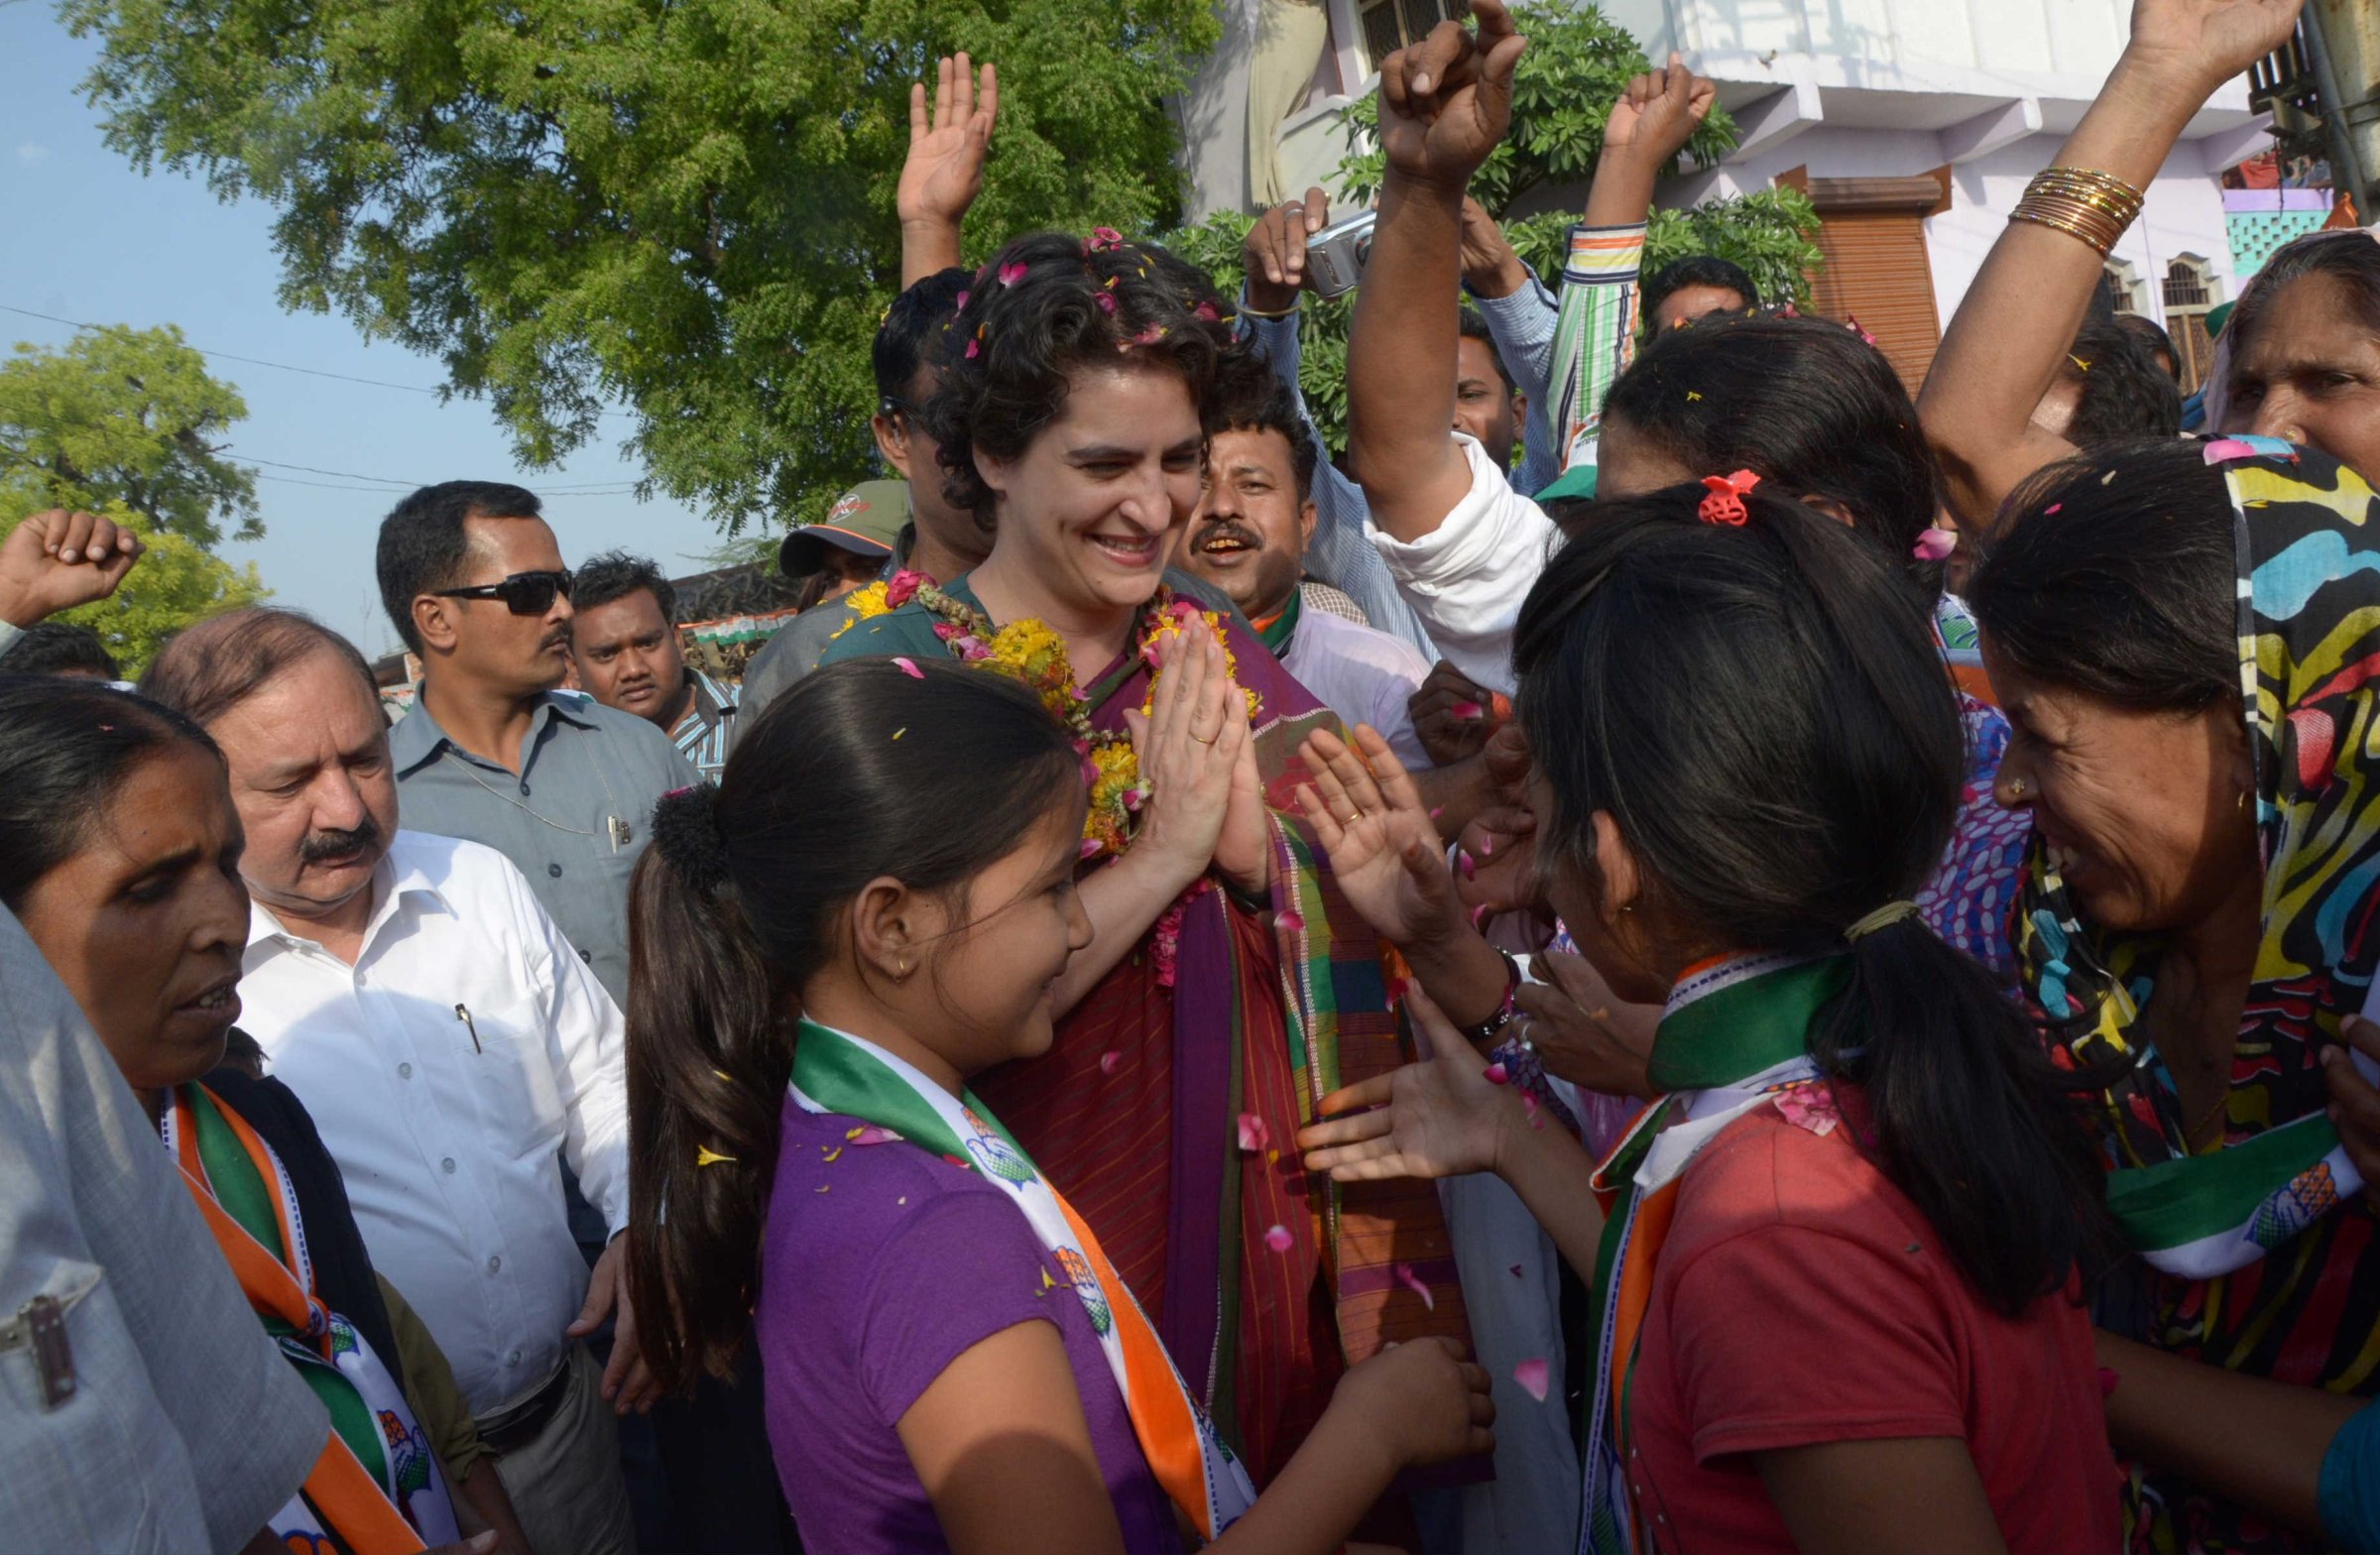 Priyanka Gandhi Vadra during a road-show campaign for her mother, Congress president Sonia Gandhi, in Raebareli, India, on April 23, 2014